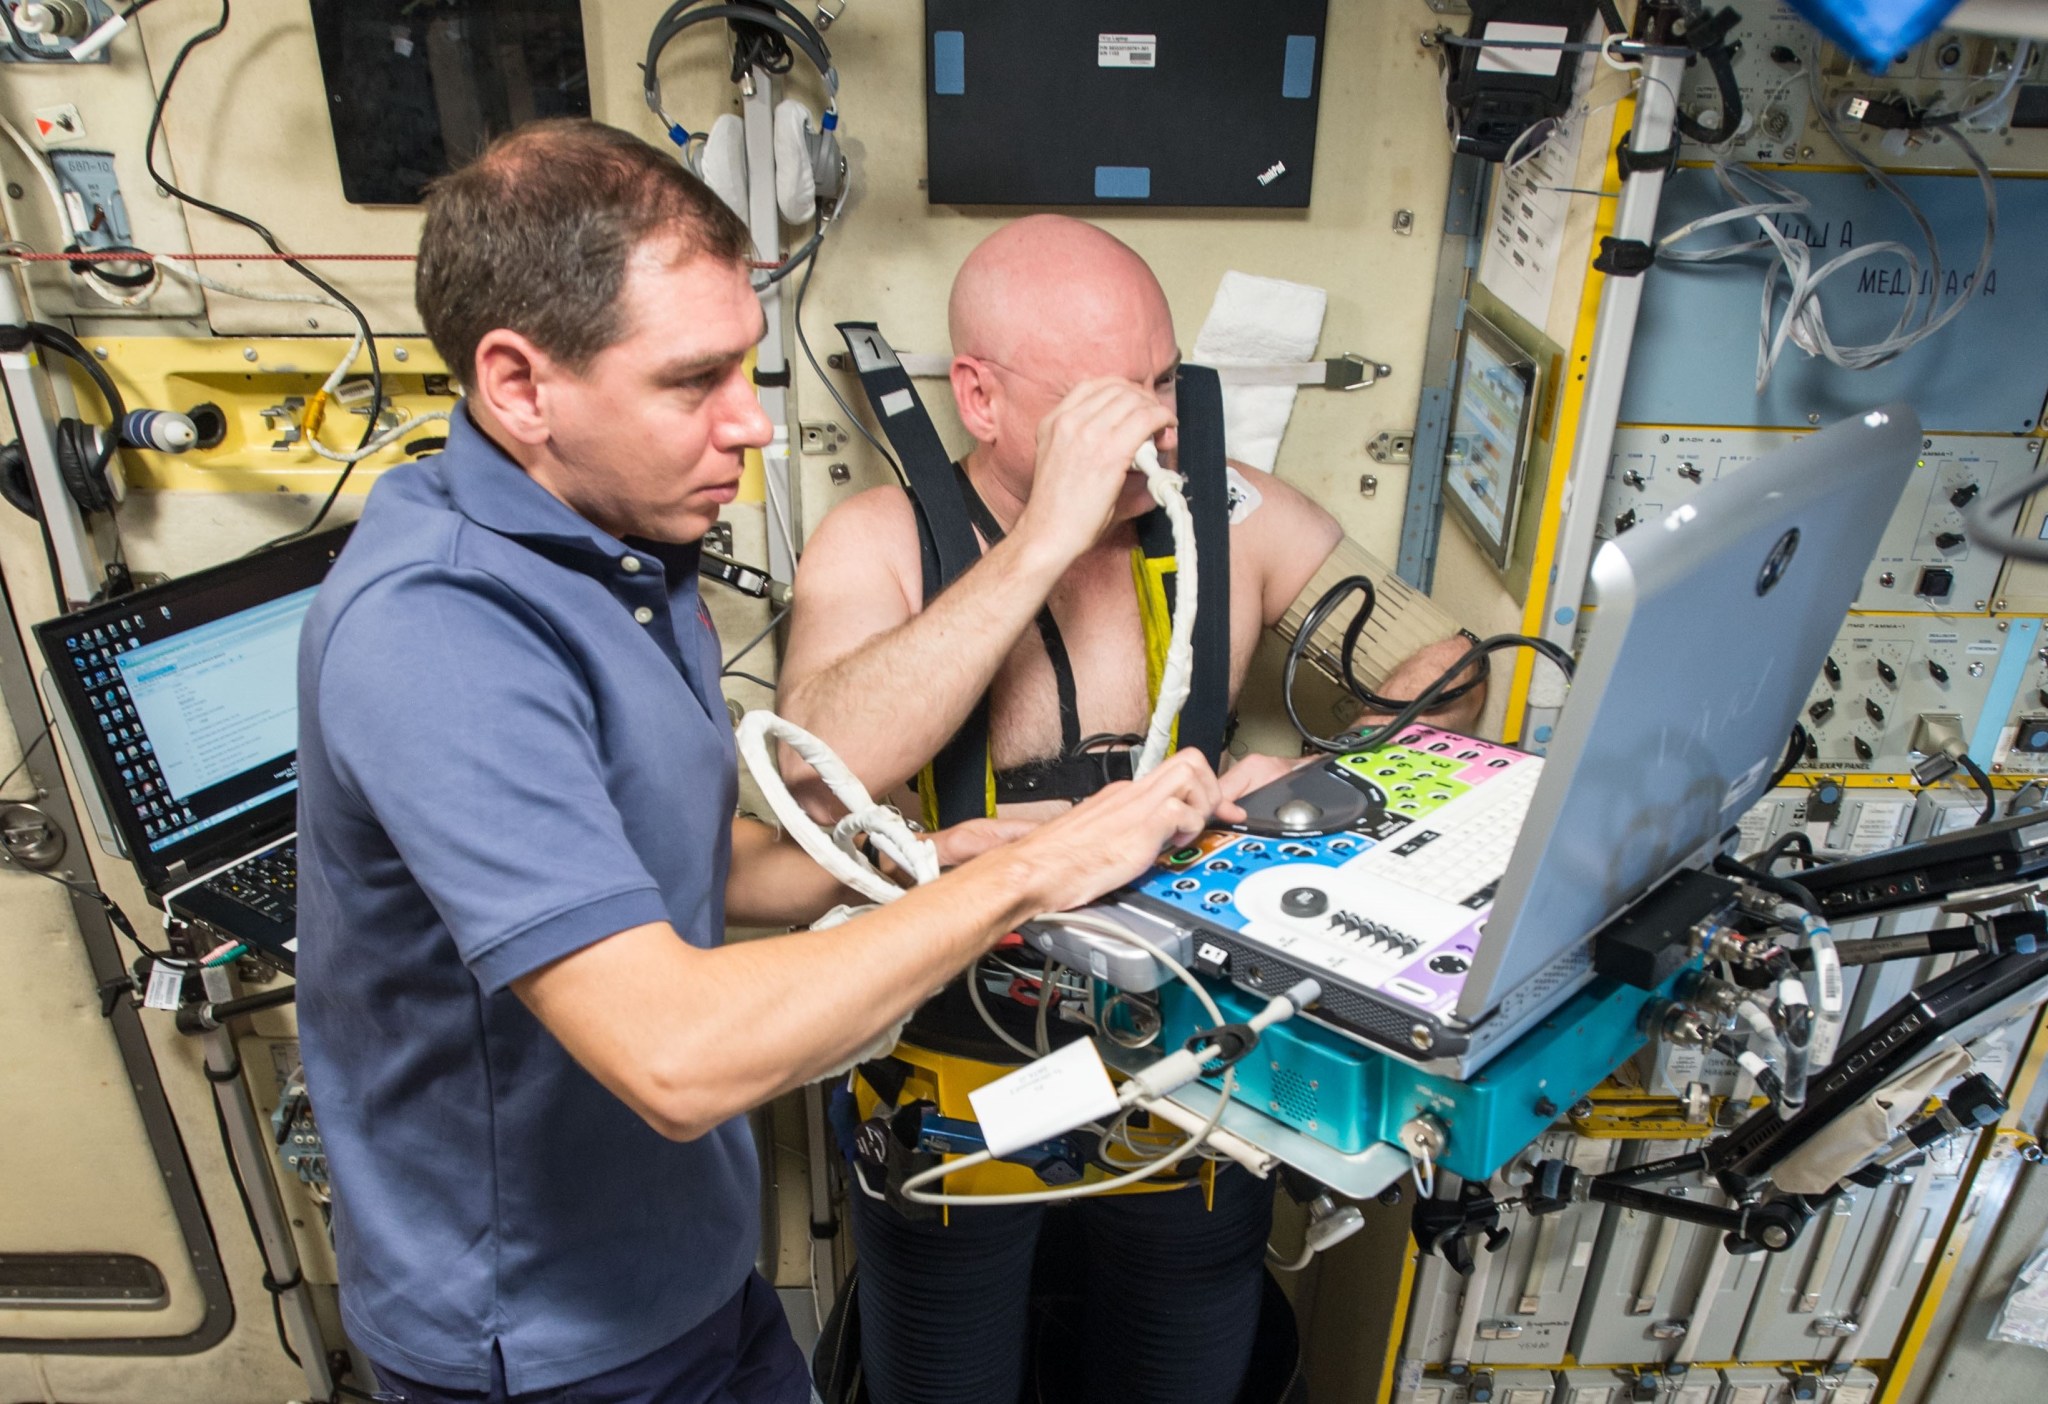 NASA astronaut Scott Kelly undergoes ultrasound measurements for the Fluid Shifts experiment.